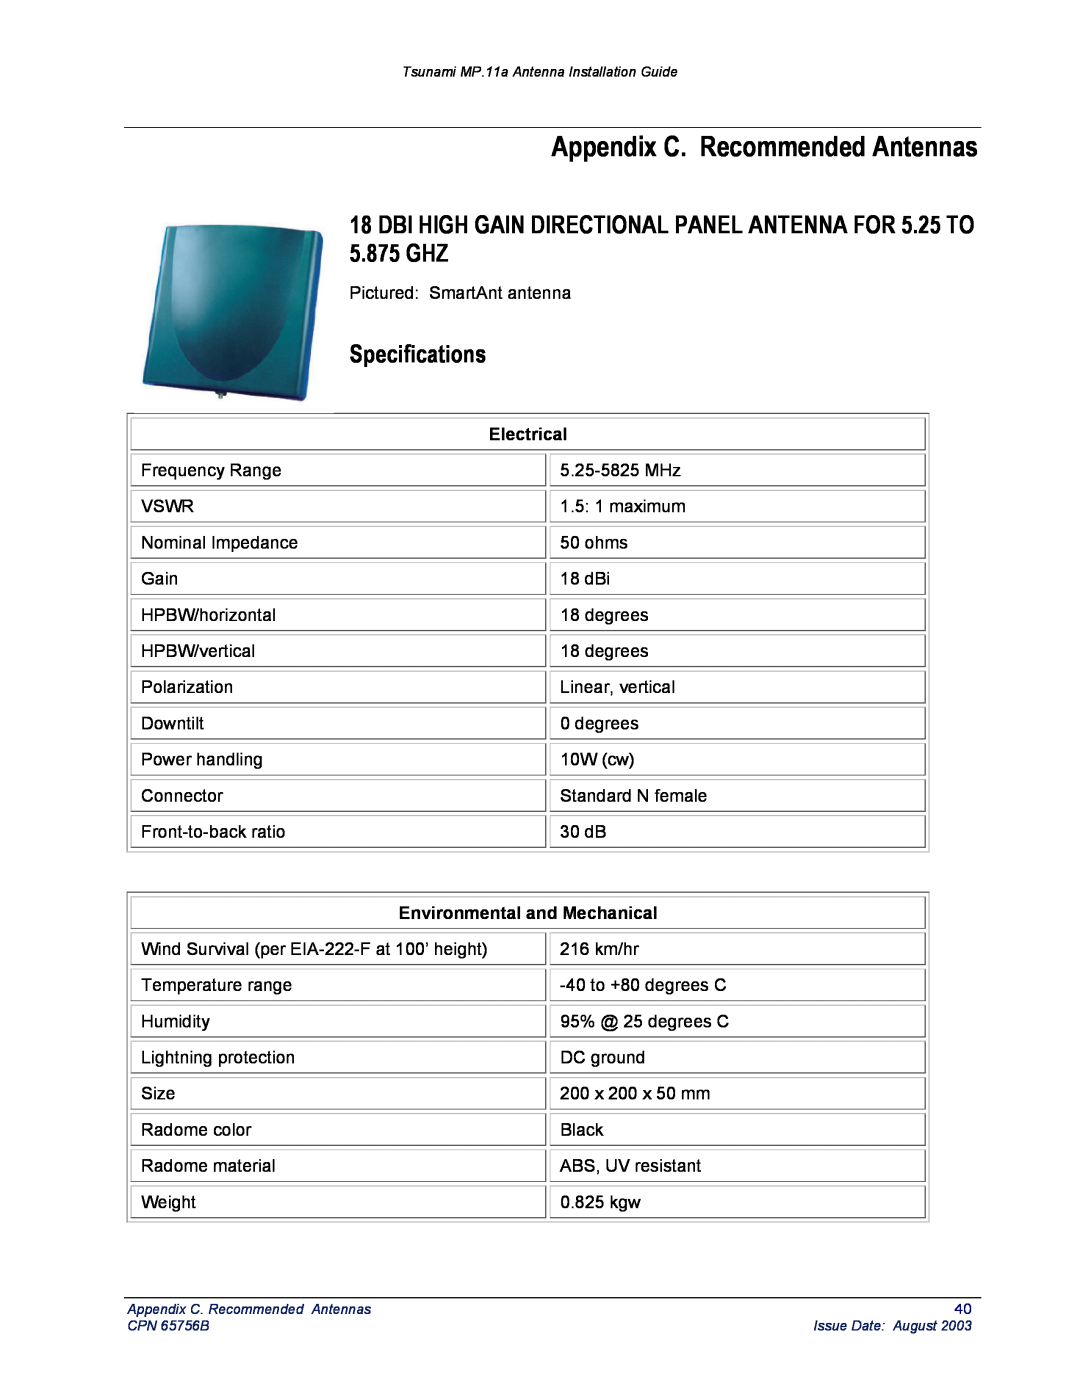 Proxim CPN 65756B manual Appendix C. Recommended Antennas, 5.875 GHZ, Electrical, Specifications 